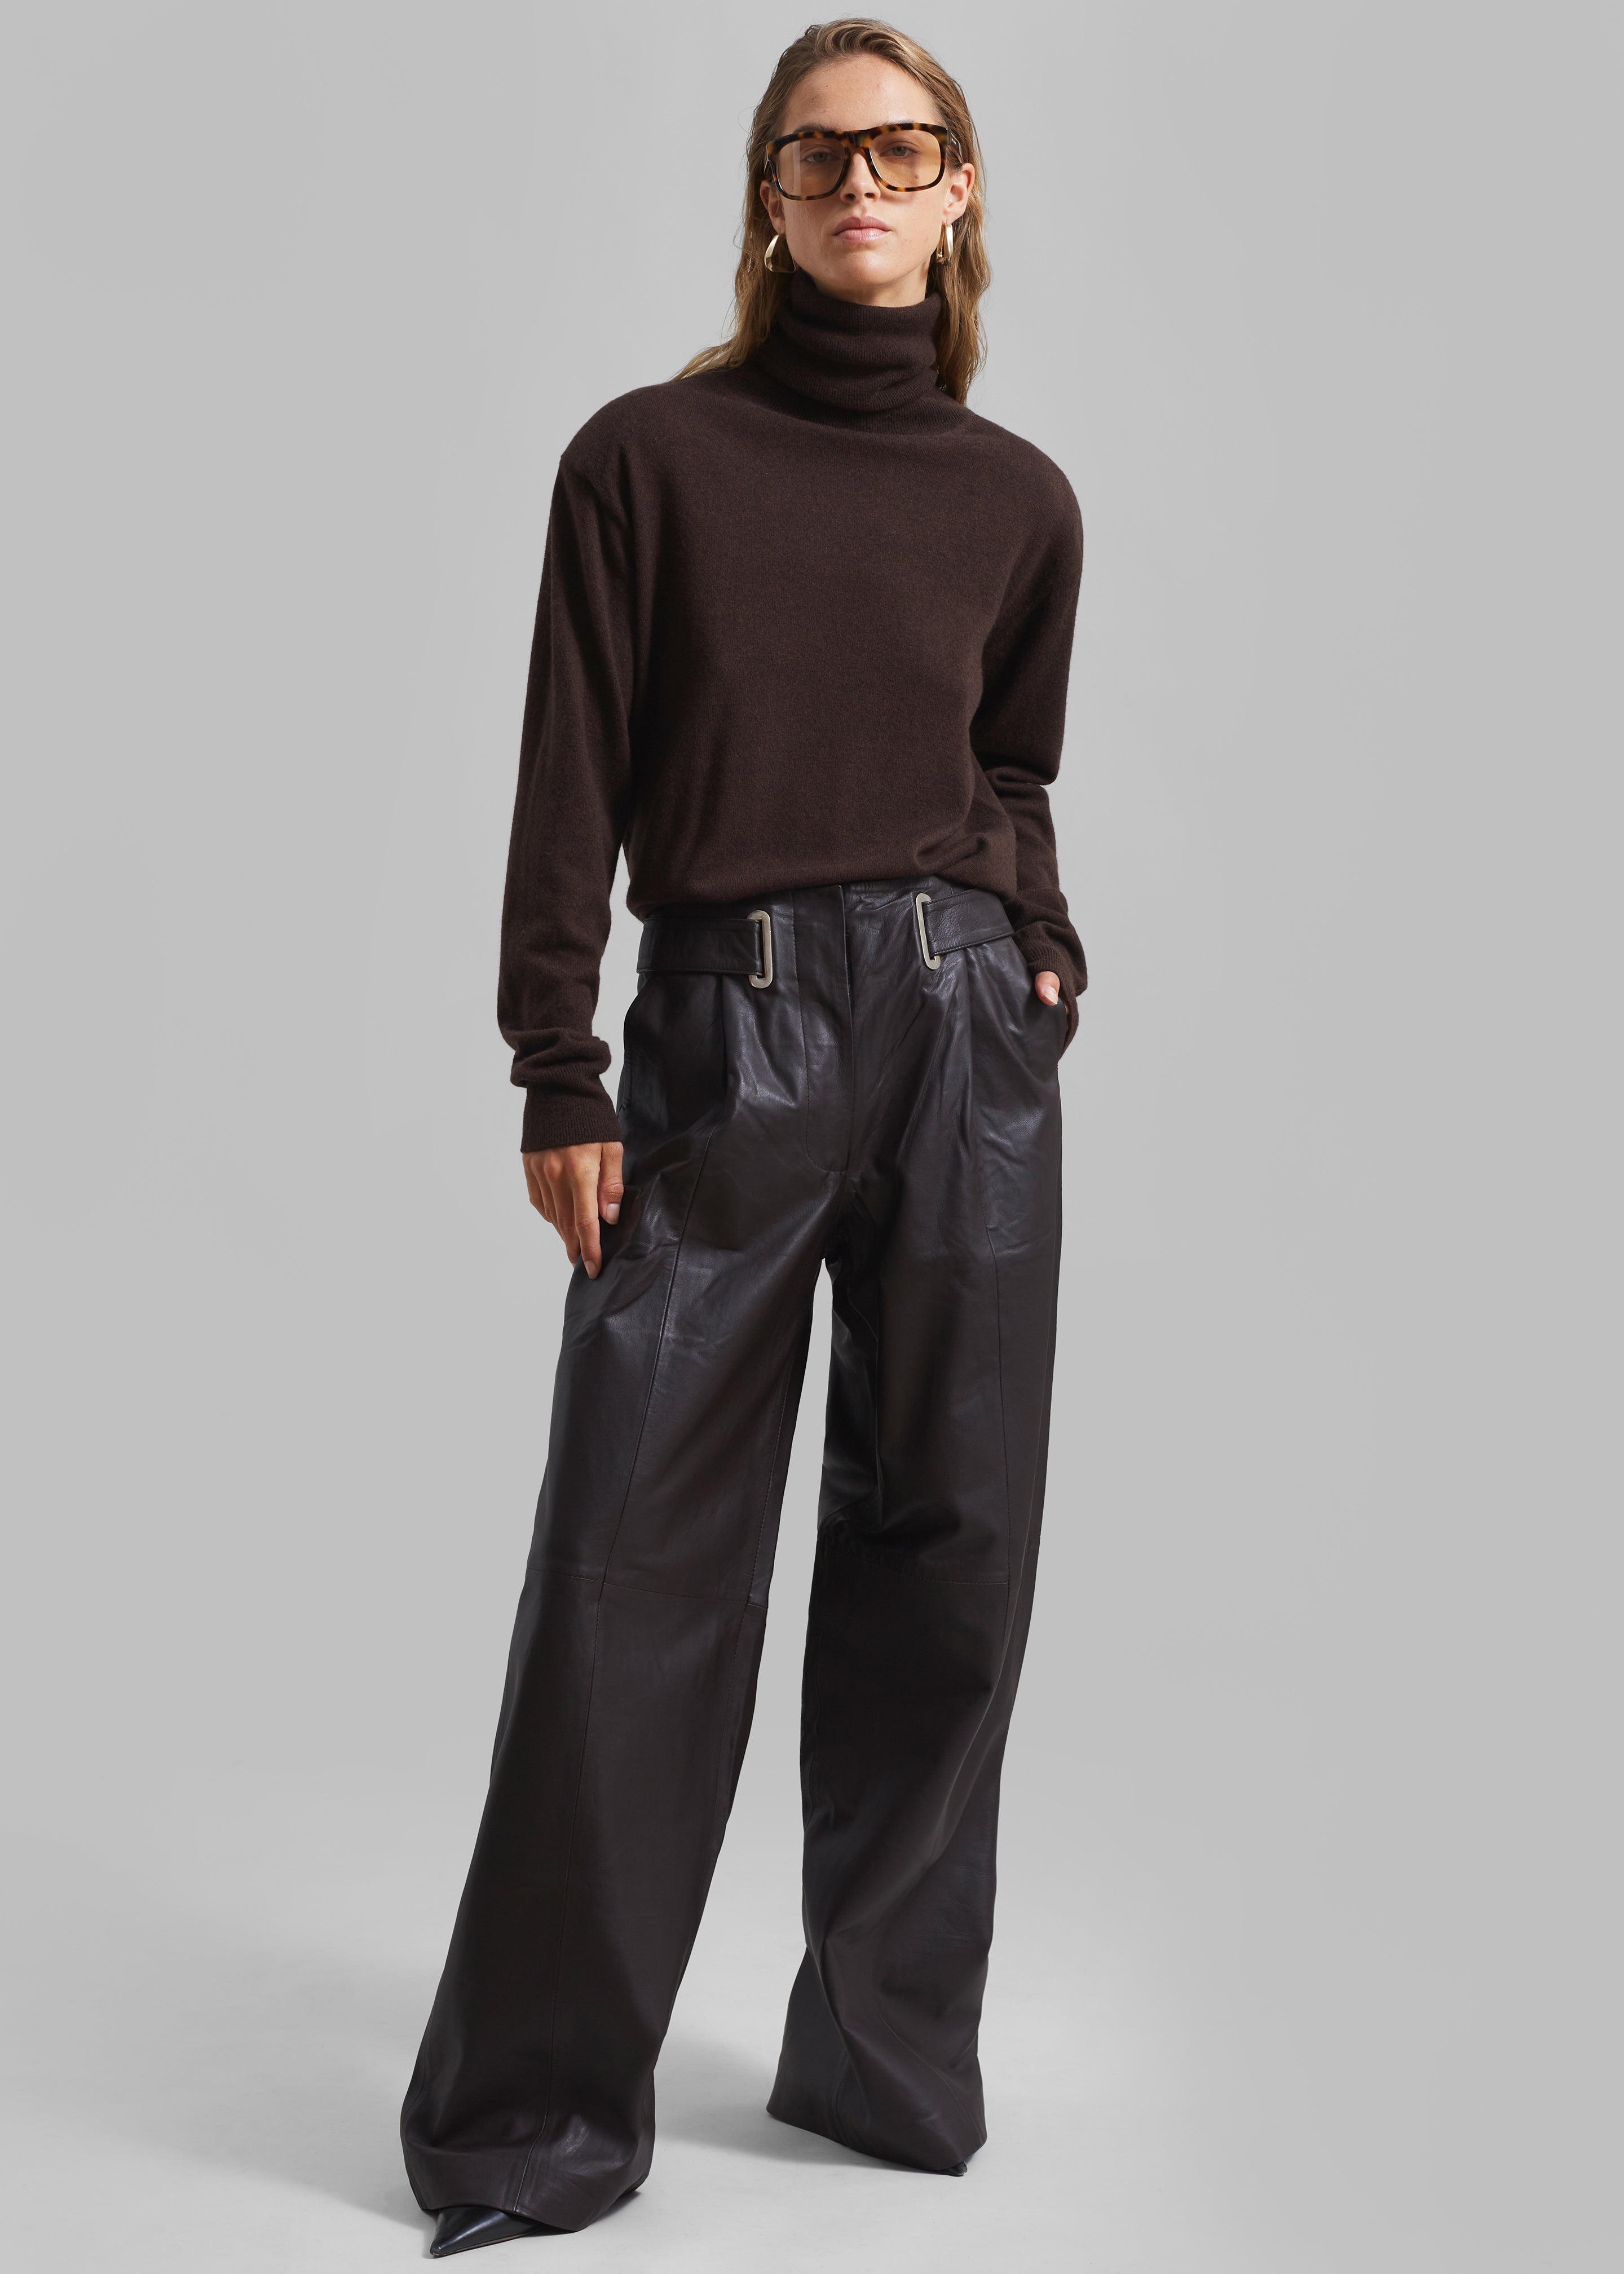 Ines Thin Padded Turtleneck - Brown - 2